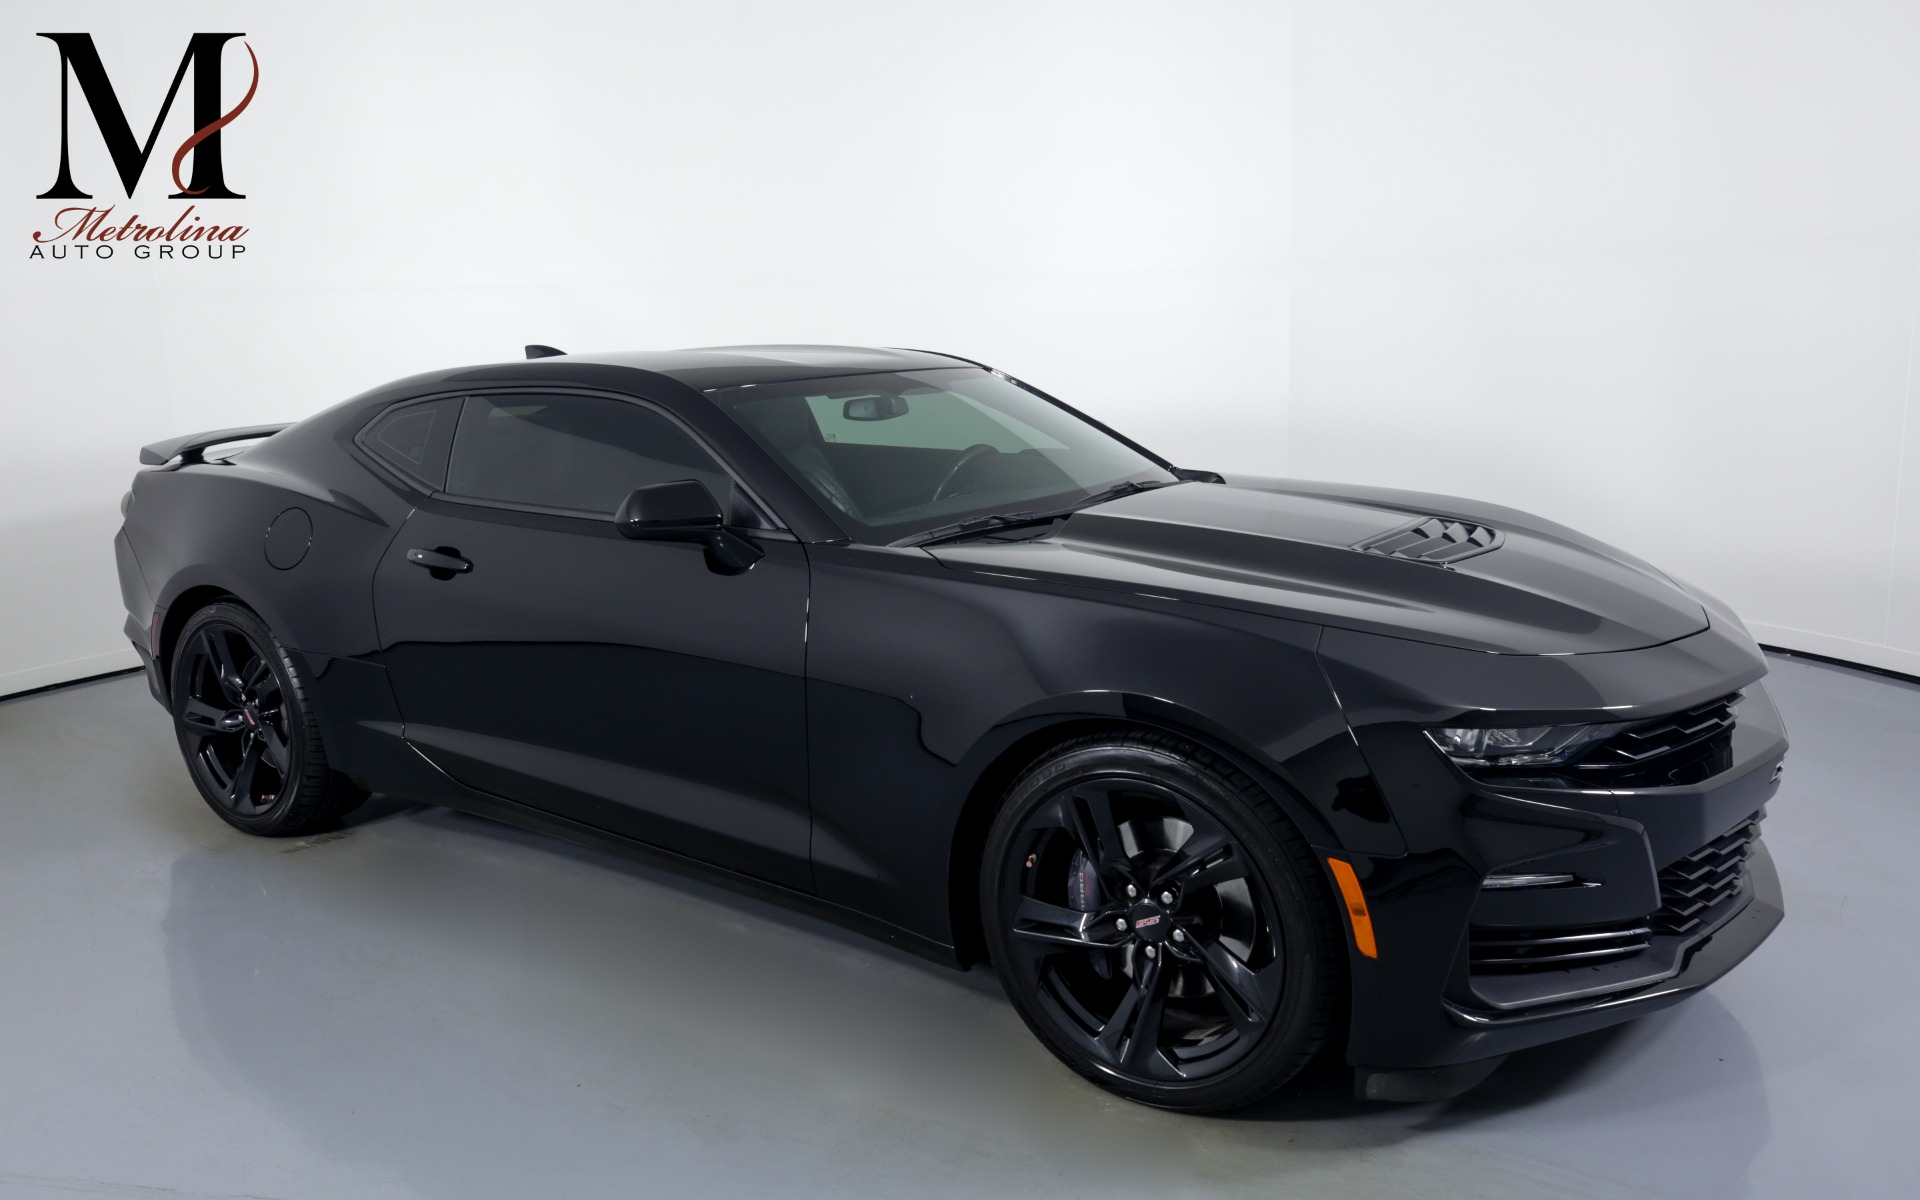 Used 2019 Chevrolet Camaro SS for sale $48,996 at Metrolina Auto Group in Charlotte NC 28217 - 1